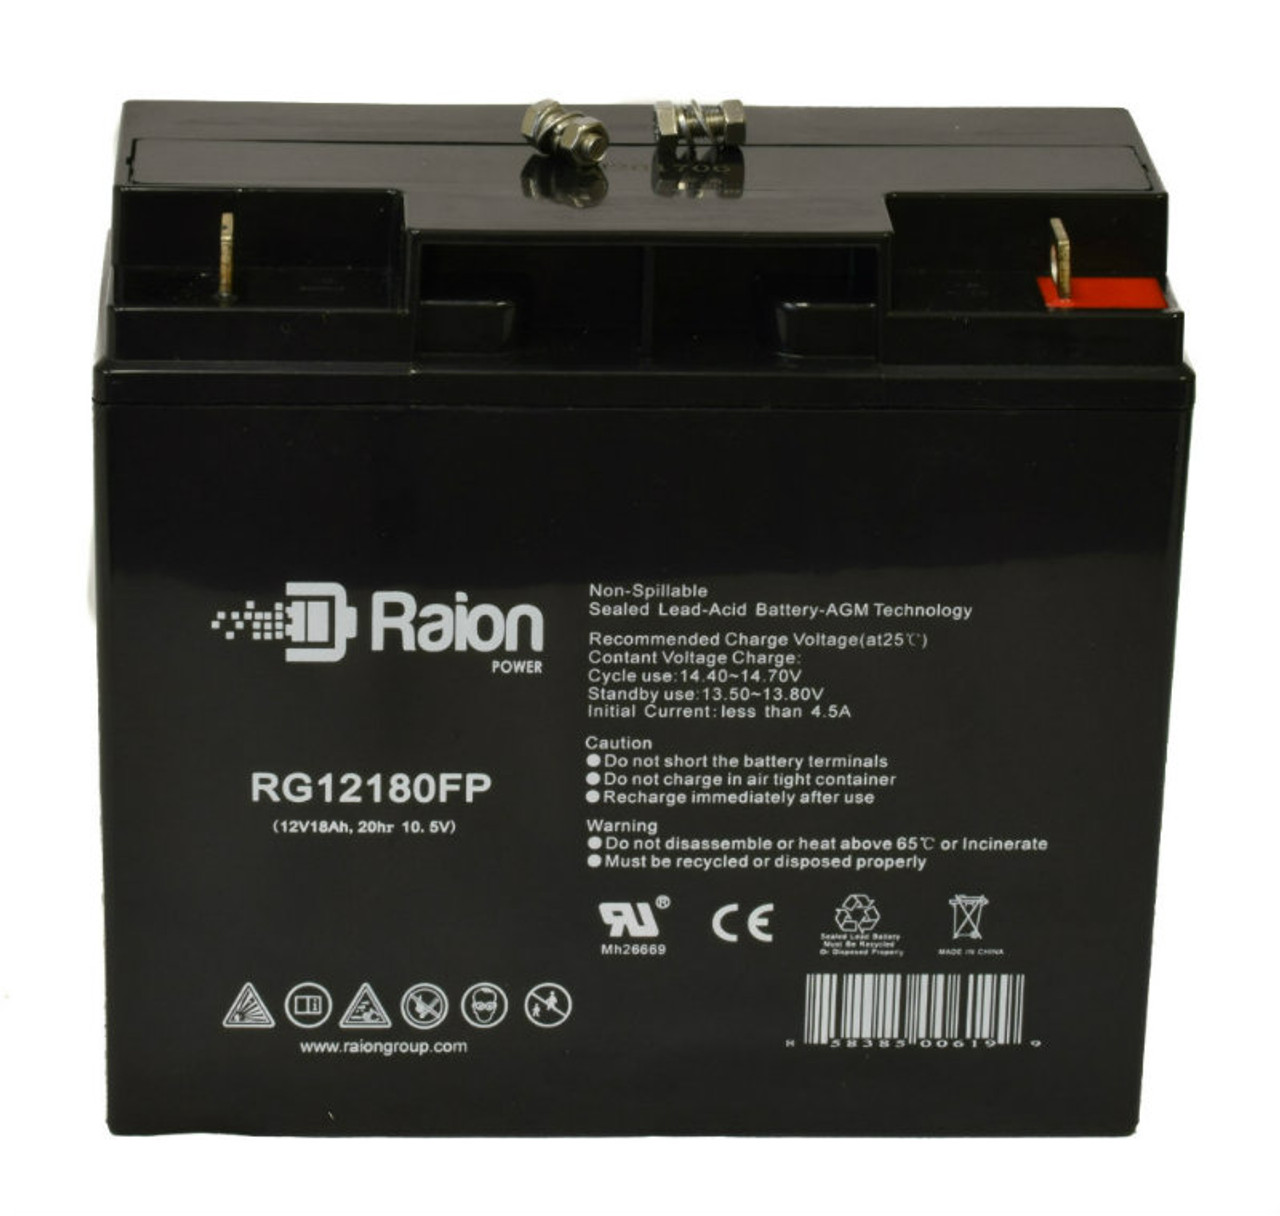 Raion Power RG12180FP 12V 18Ah AGM Battery for Forney 52732 Battery Booster Pack Air Compressor